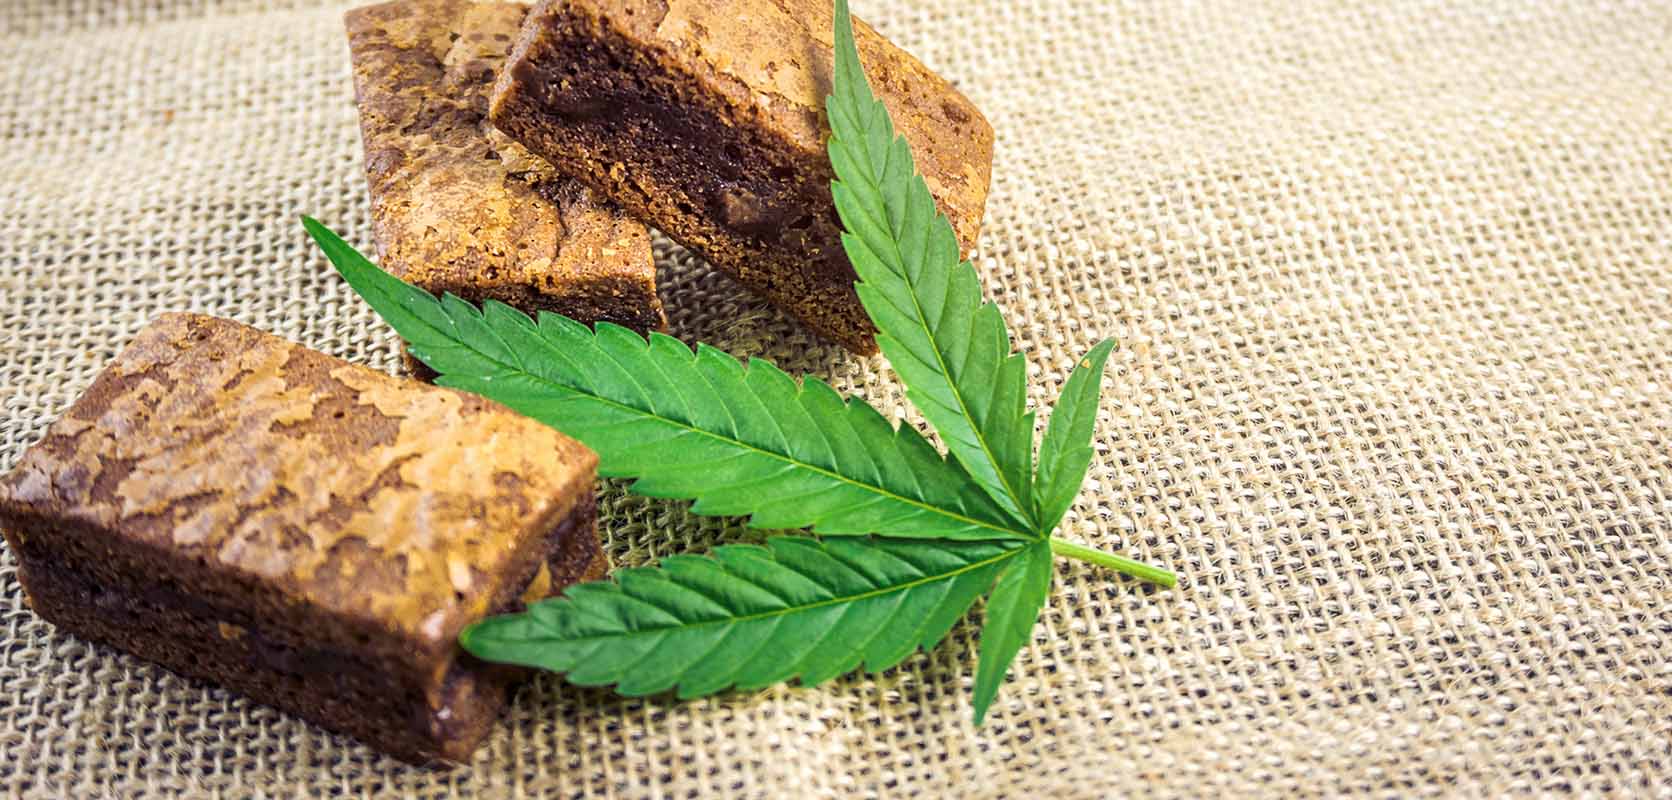 Baked edibles, weed brownies, and a cannabis leaf. online dispensary. weed shop. moon rock weed.